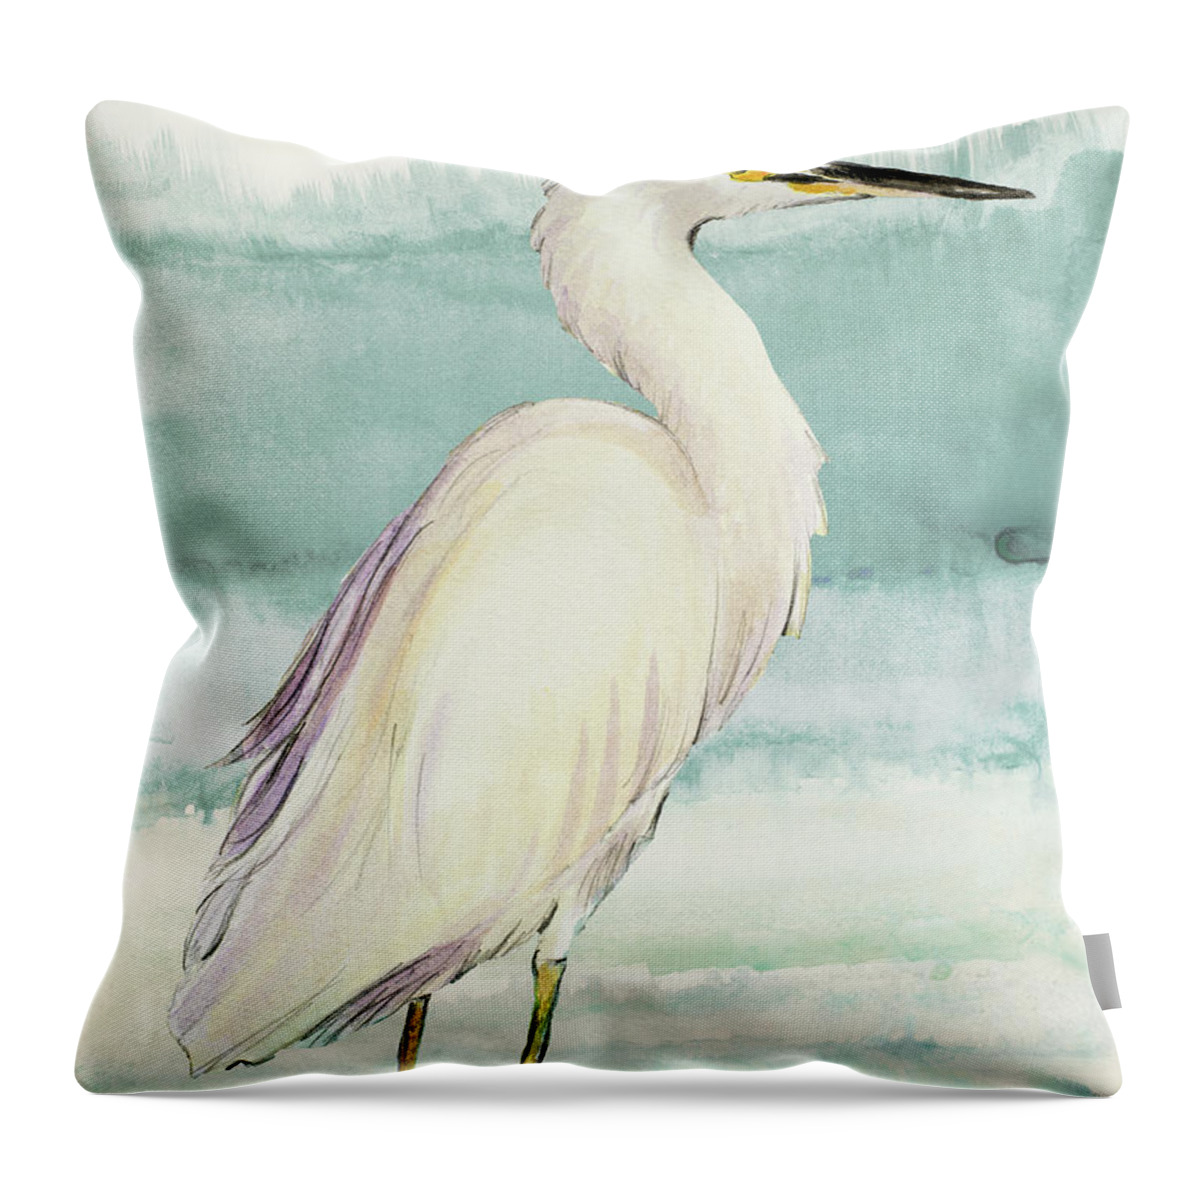 Heron Throw Pillow featuring the painting Heron On Seaglass II #1 by Lanie Loreth